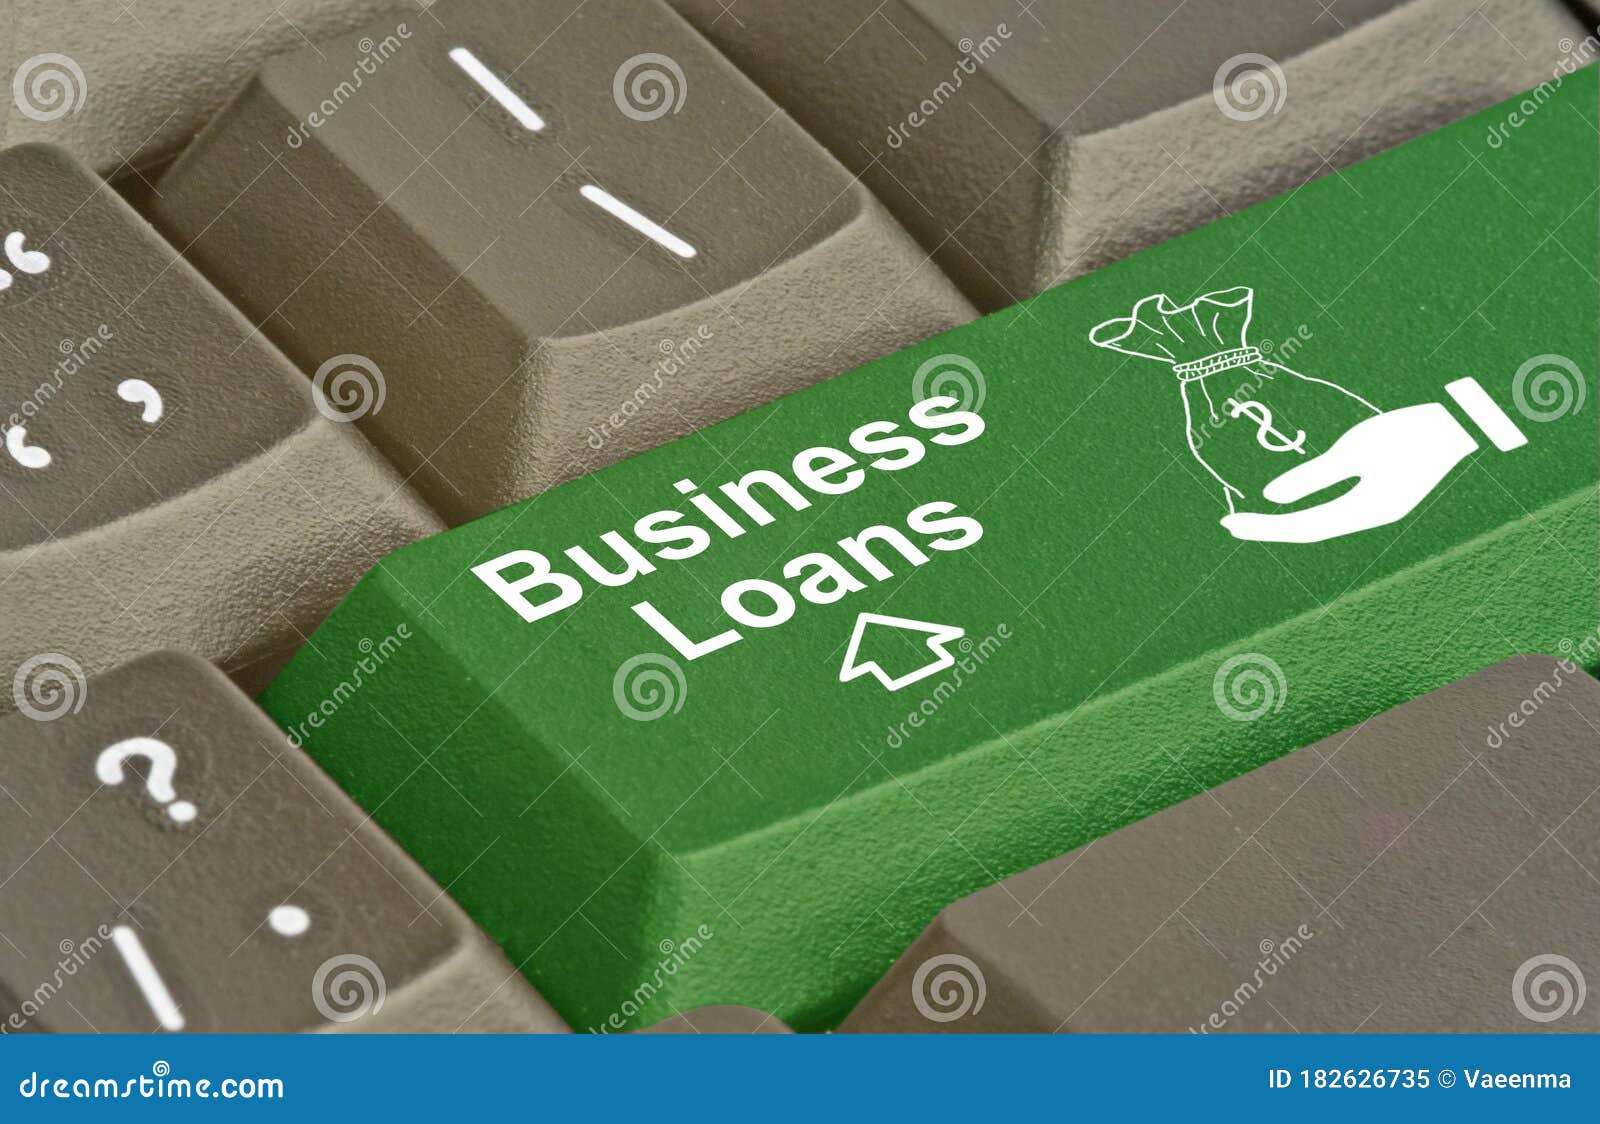 key for business loans